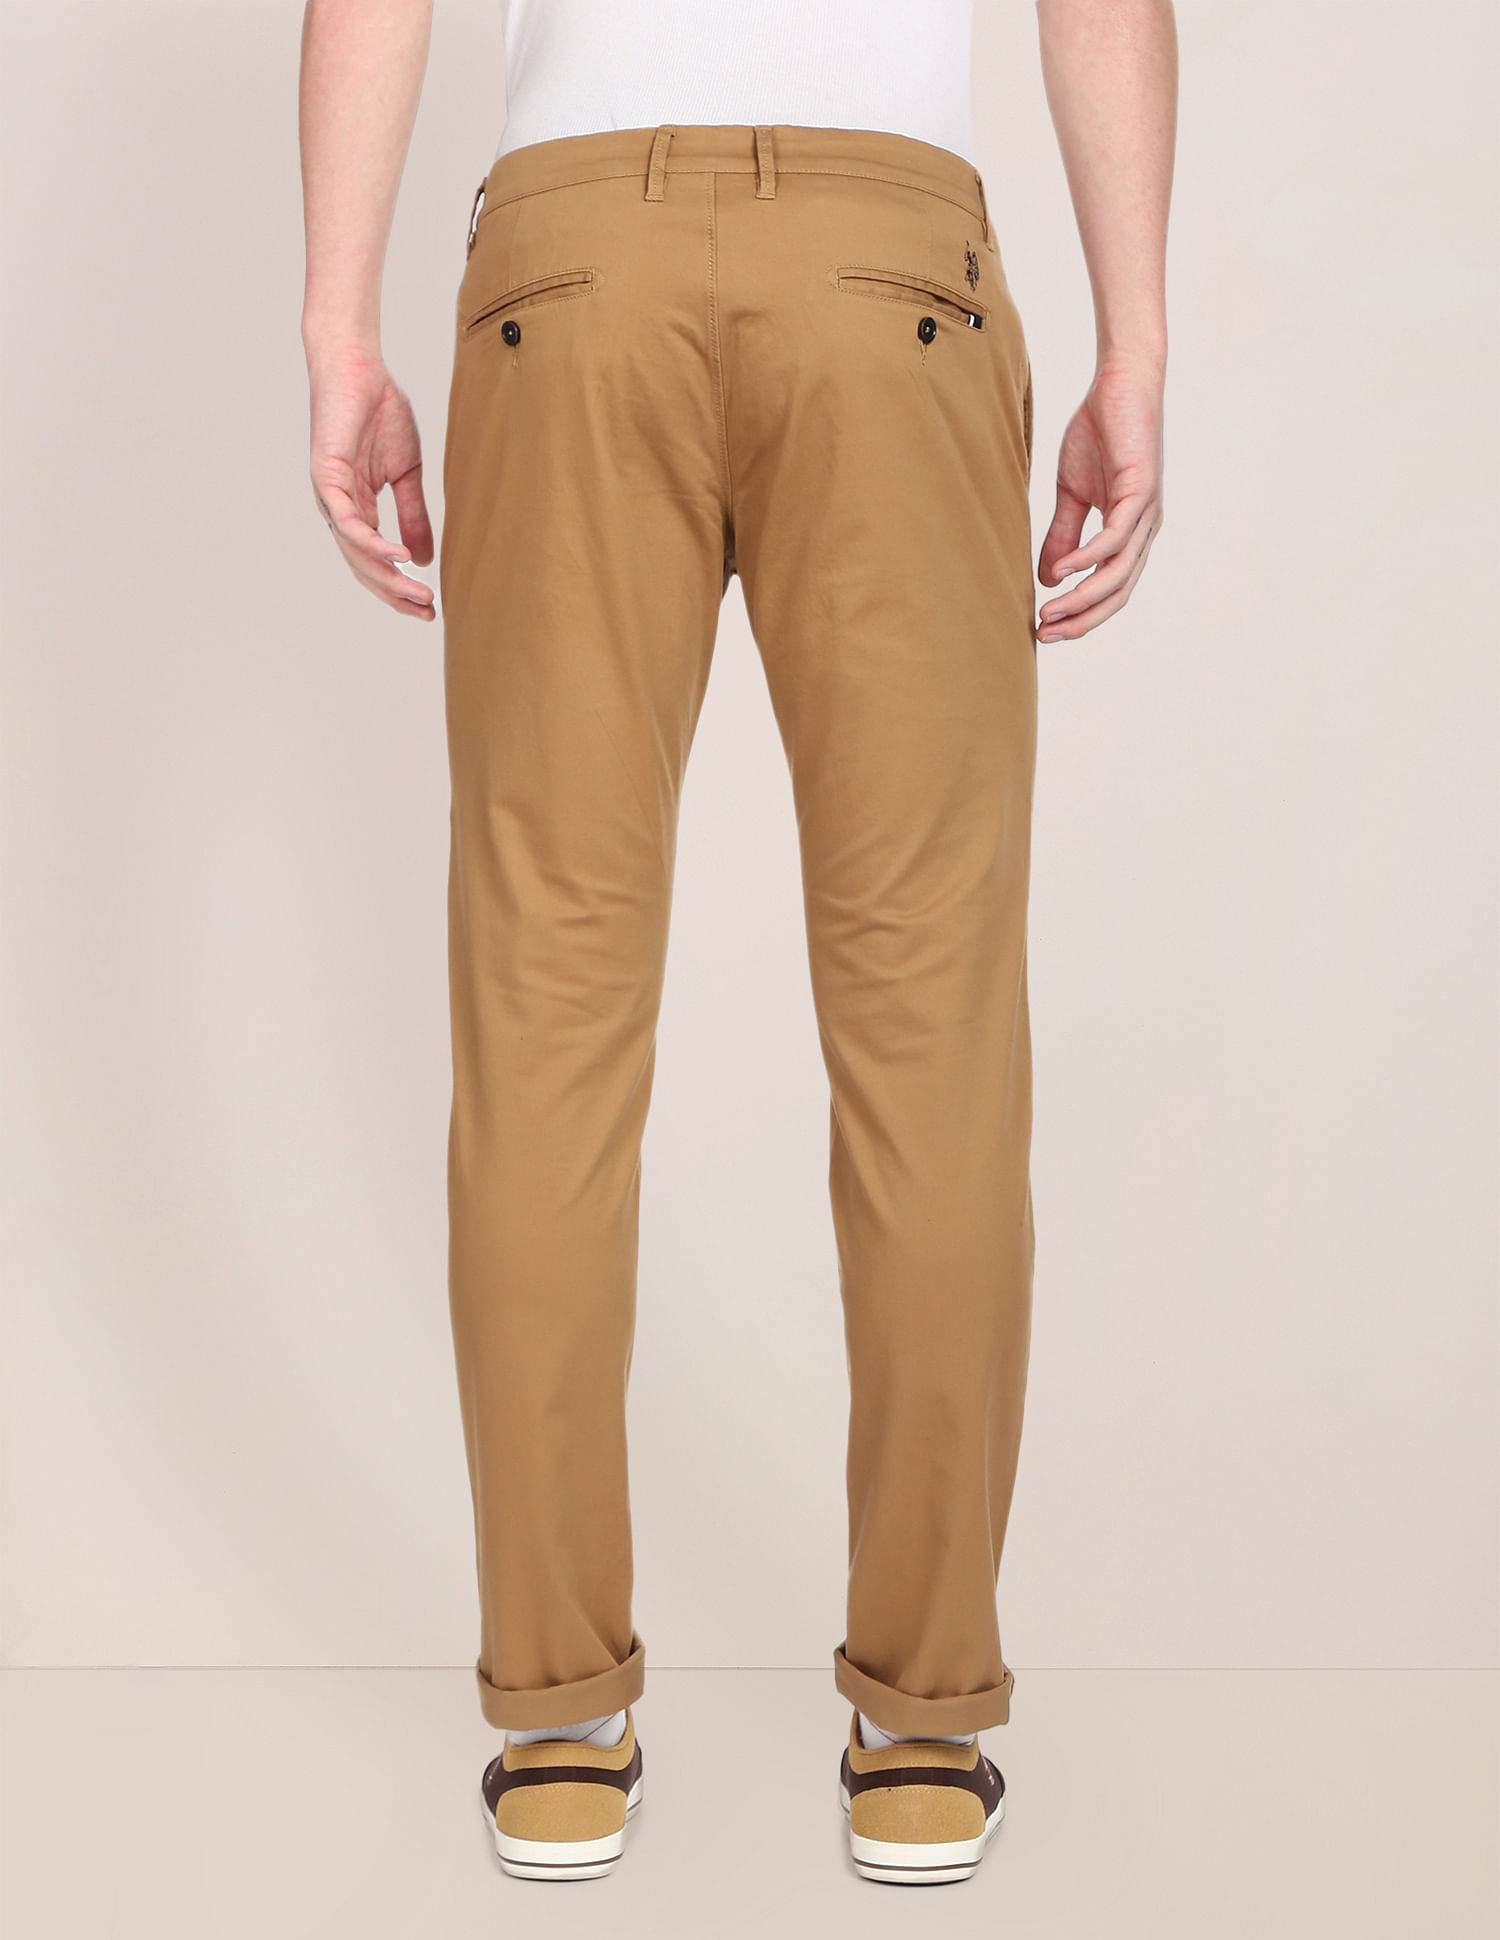 Us Polo Cotton Pants at Best Price in Gandhinagar | S Creation